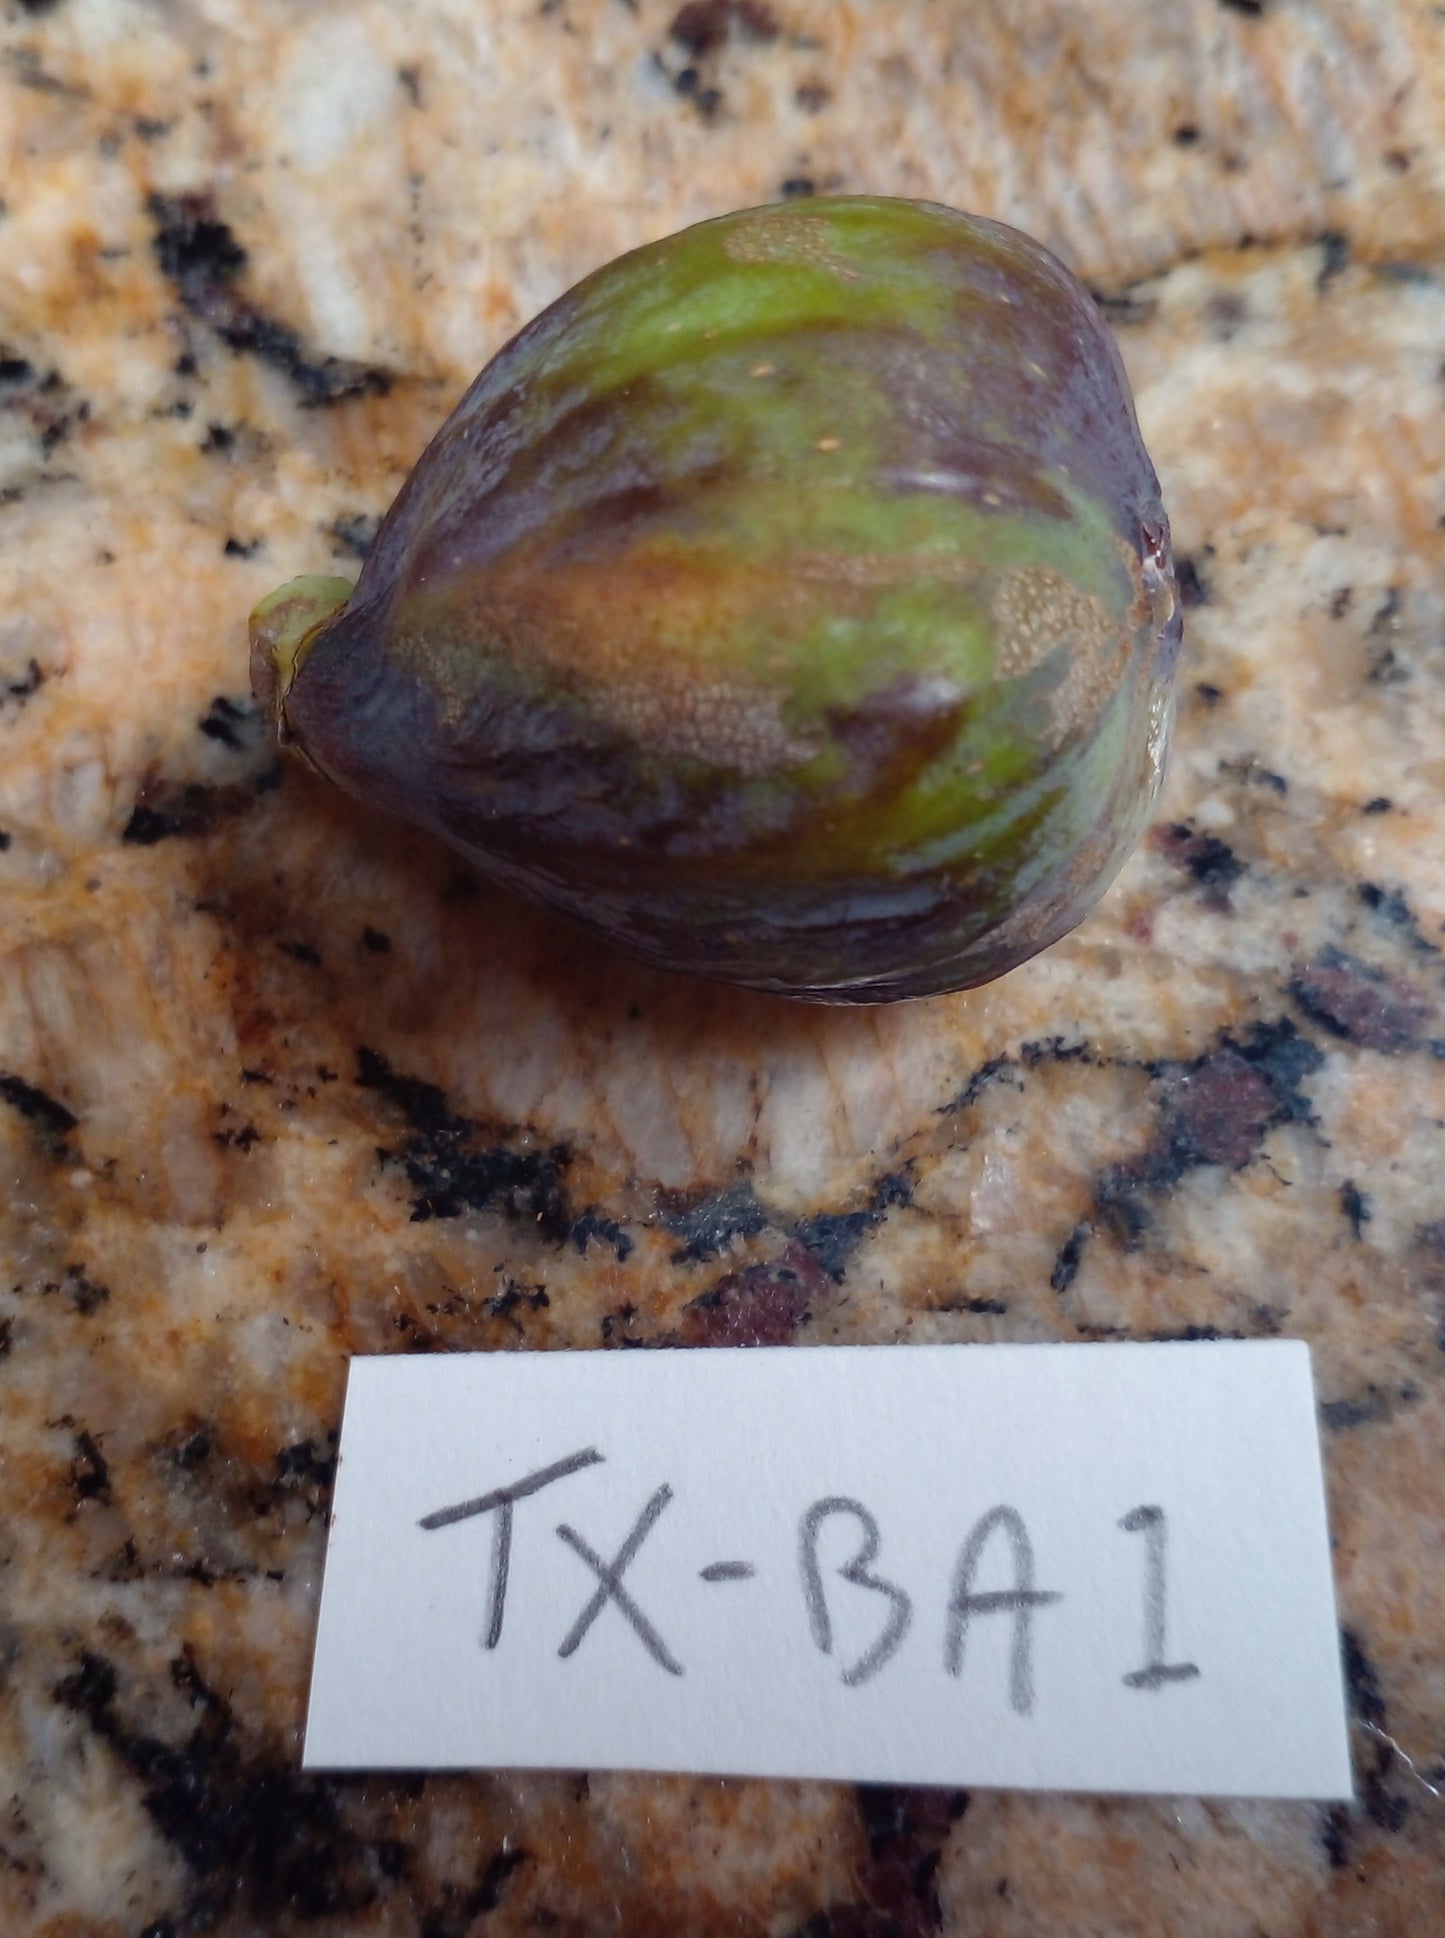 Texas BA-1 Fig - 2 Cuttings - Bronze Figs with Sweet Strawberry Flavor